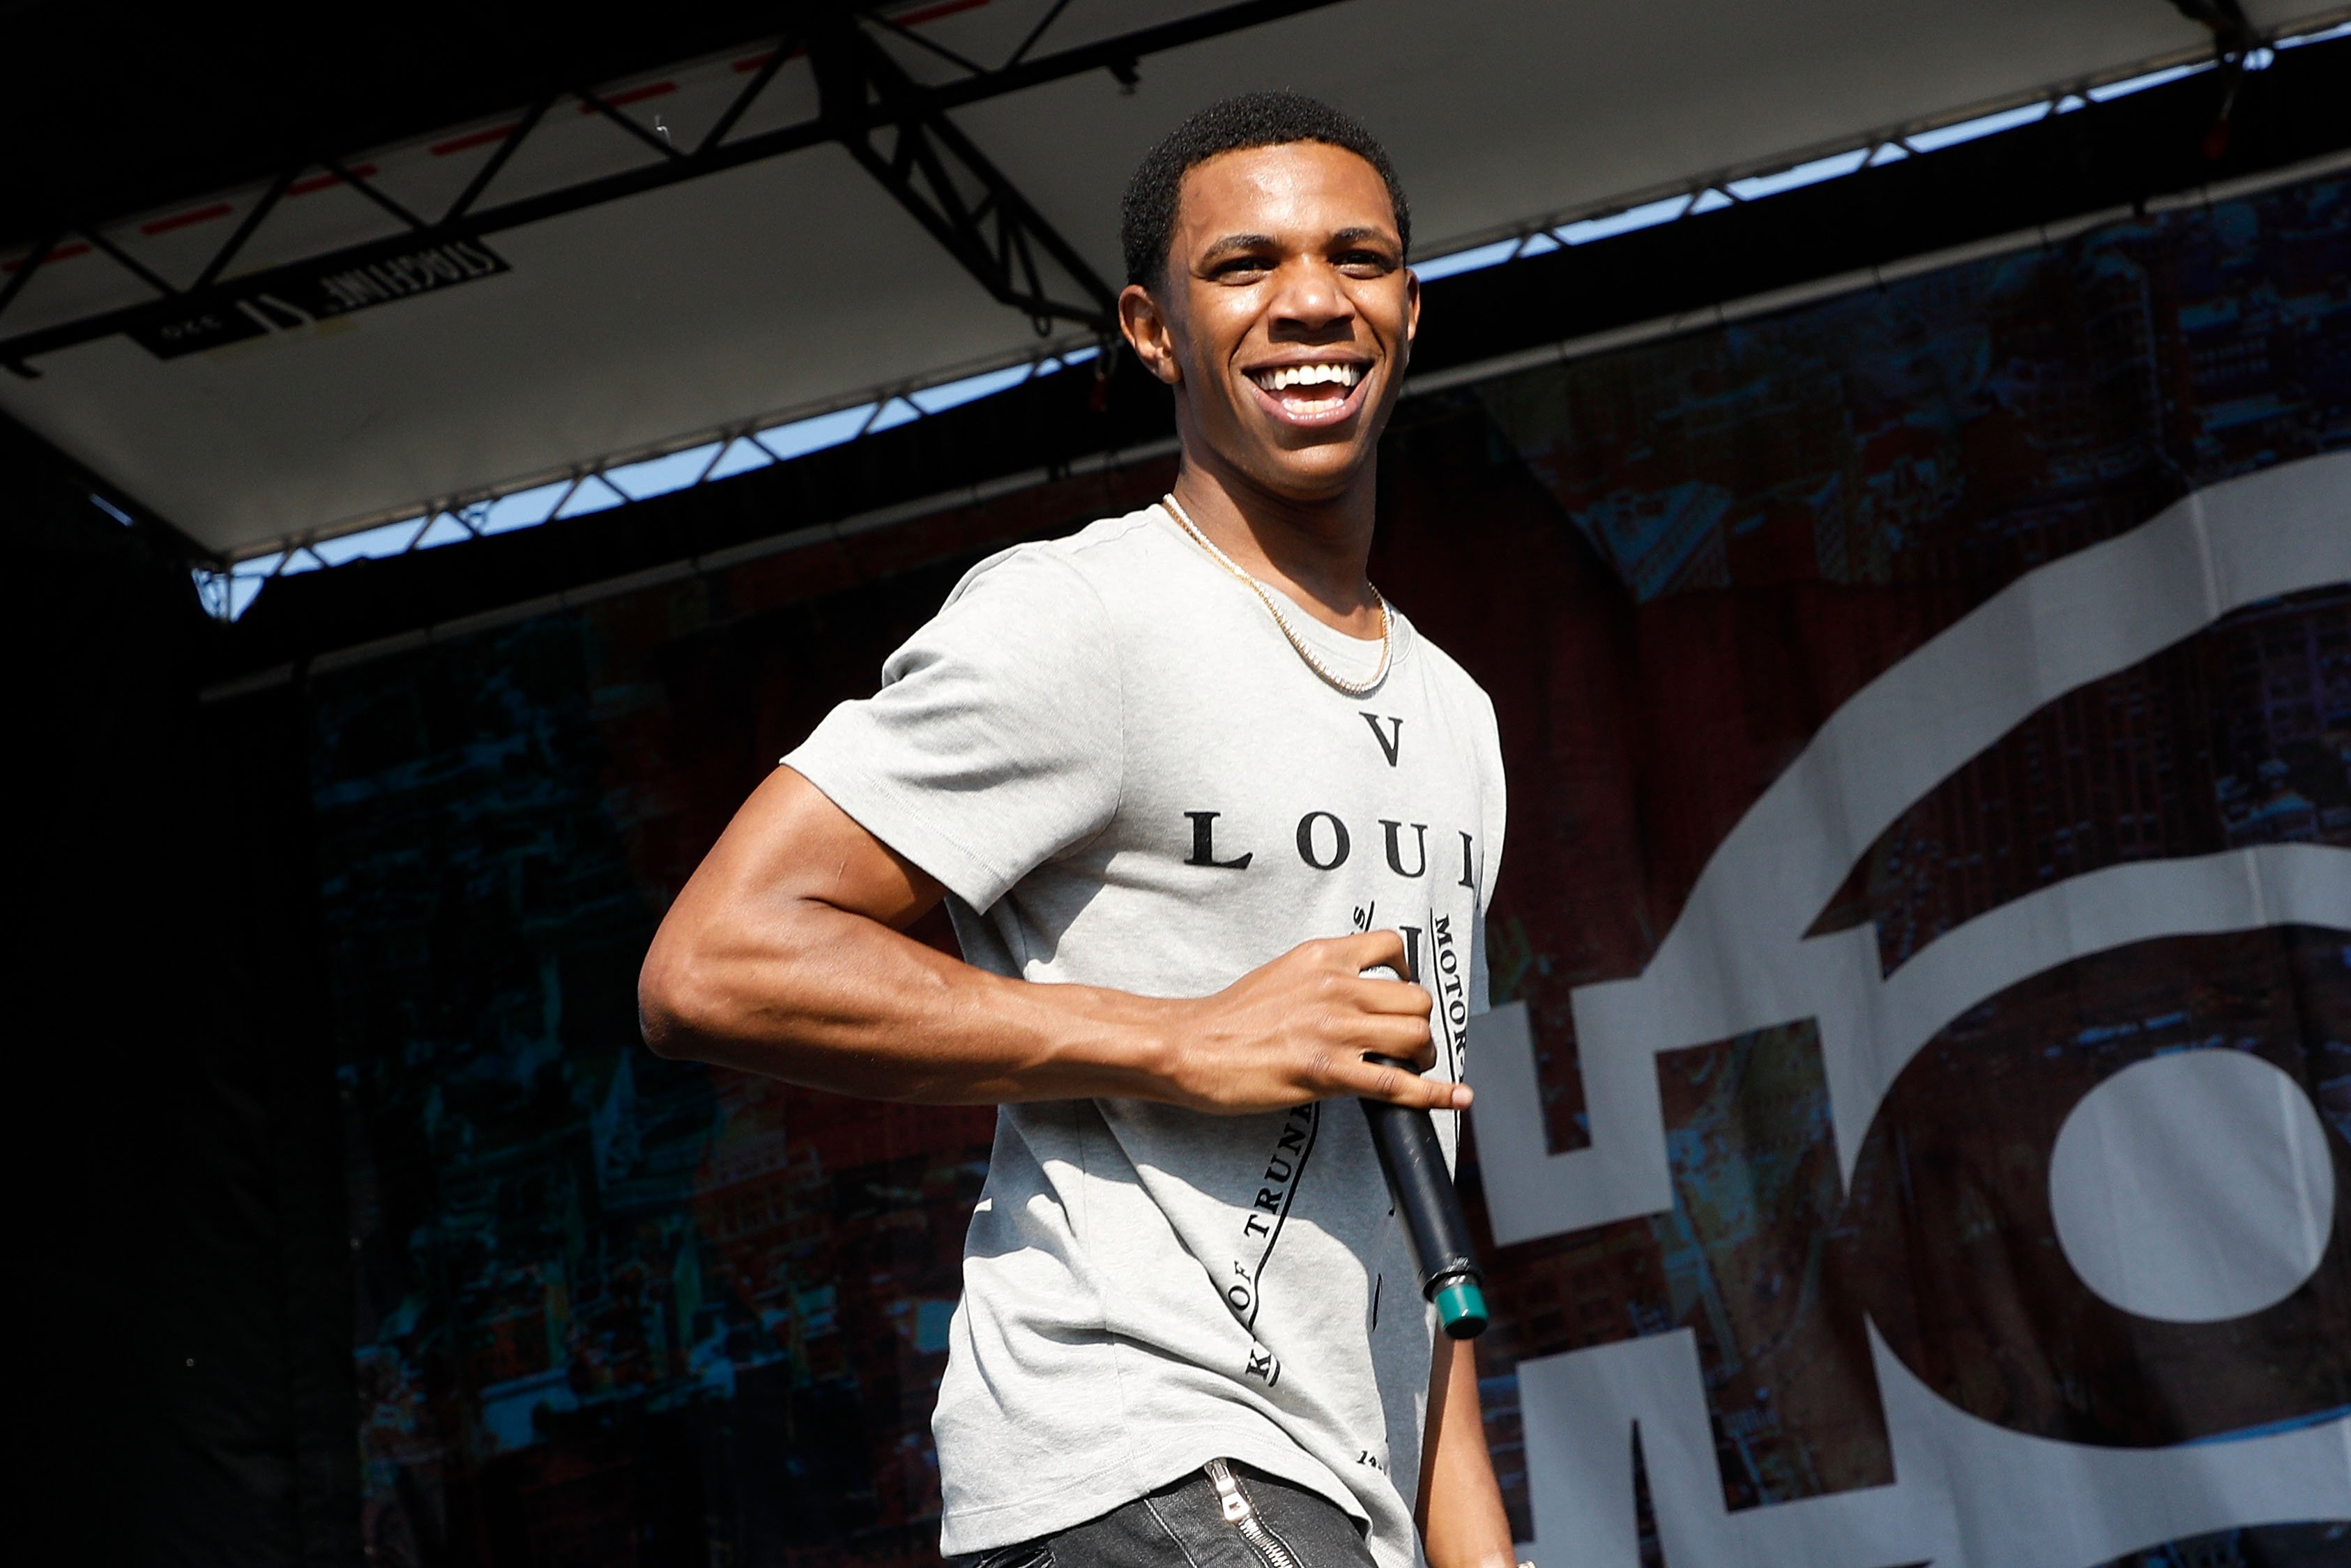 A Boogie Wit Da Hoodie performing at the 2017 Hot 97 Summer Jam in New Jersey on June 11, 2017 | Soirce: Getty Images